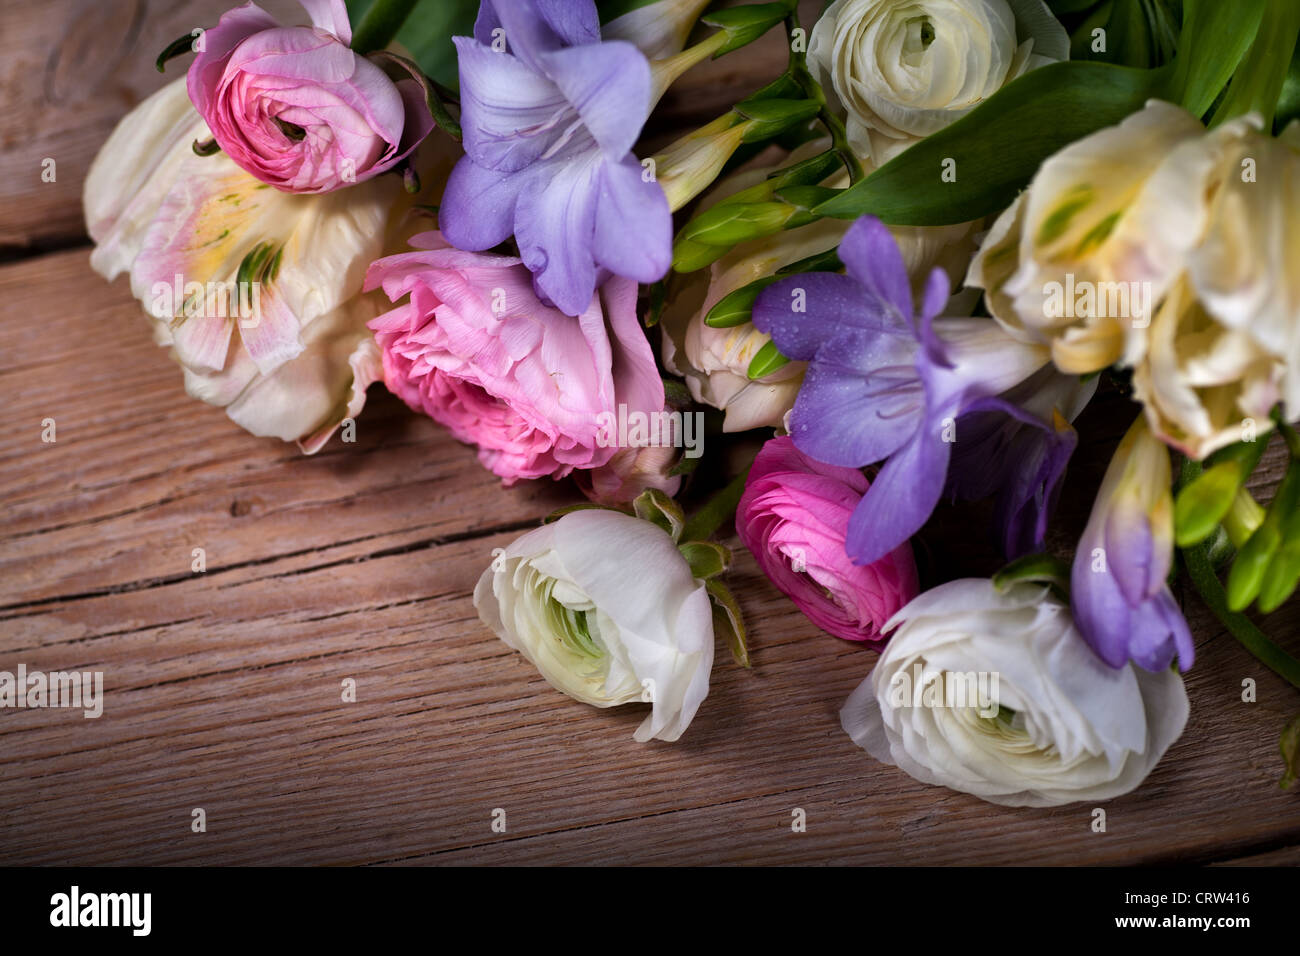 bunch of spring flowers Stock Photo